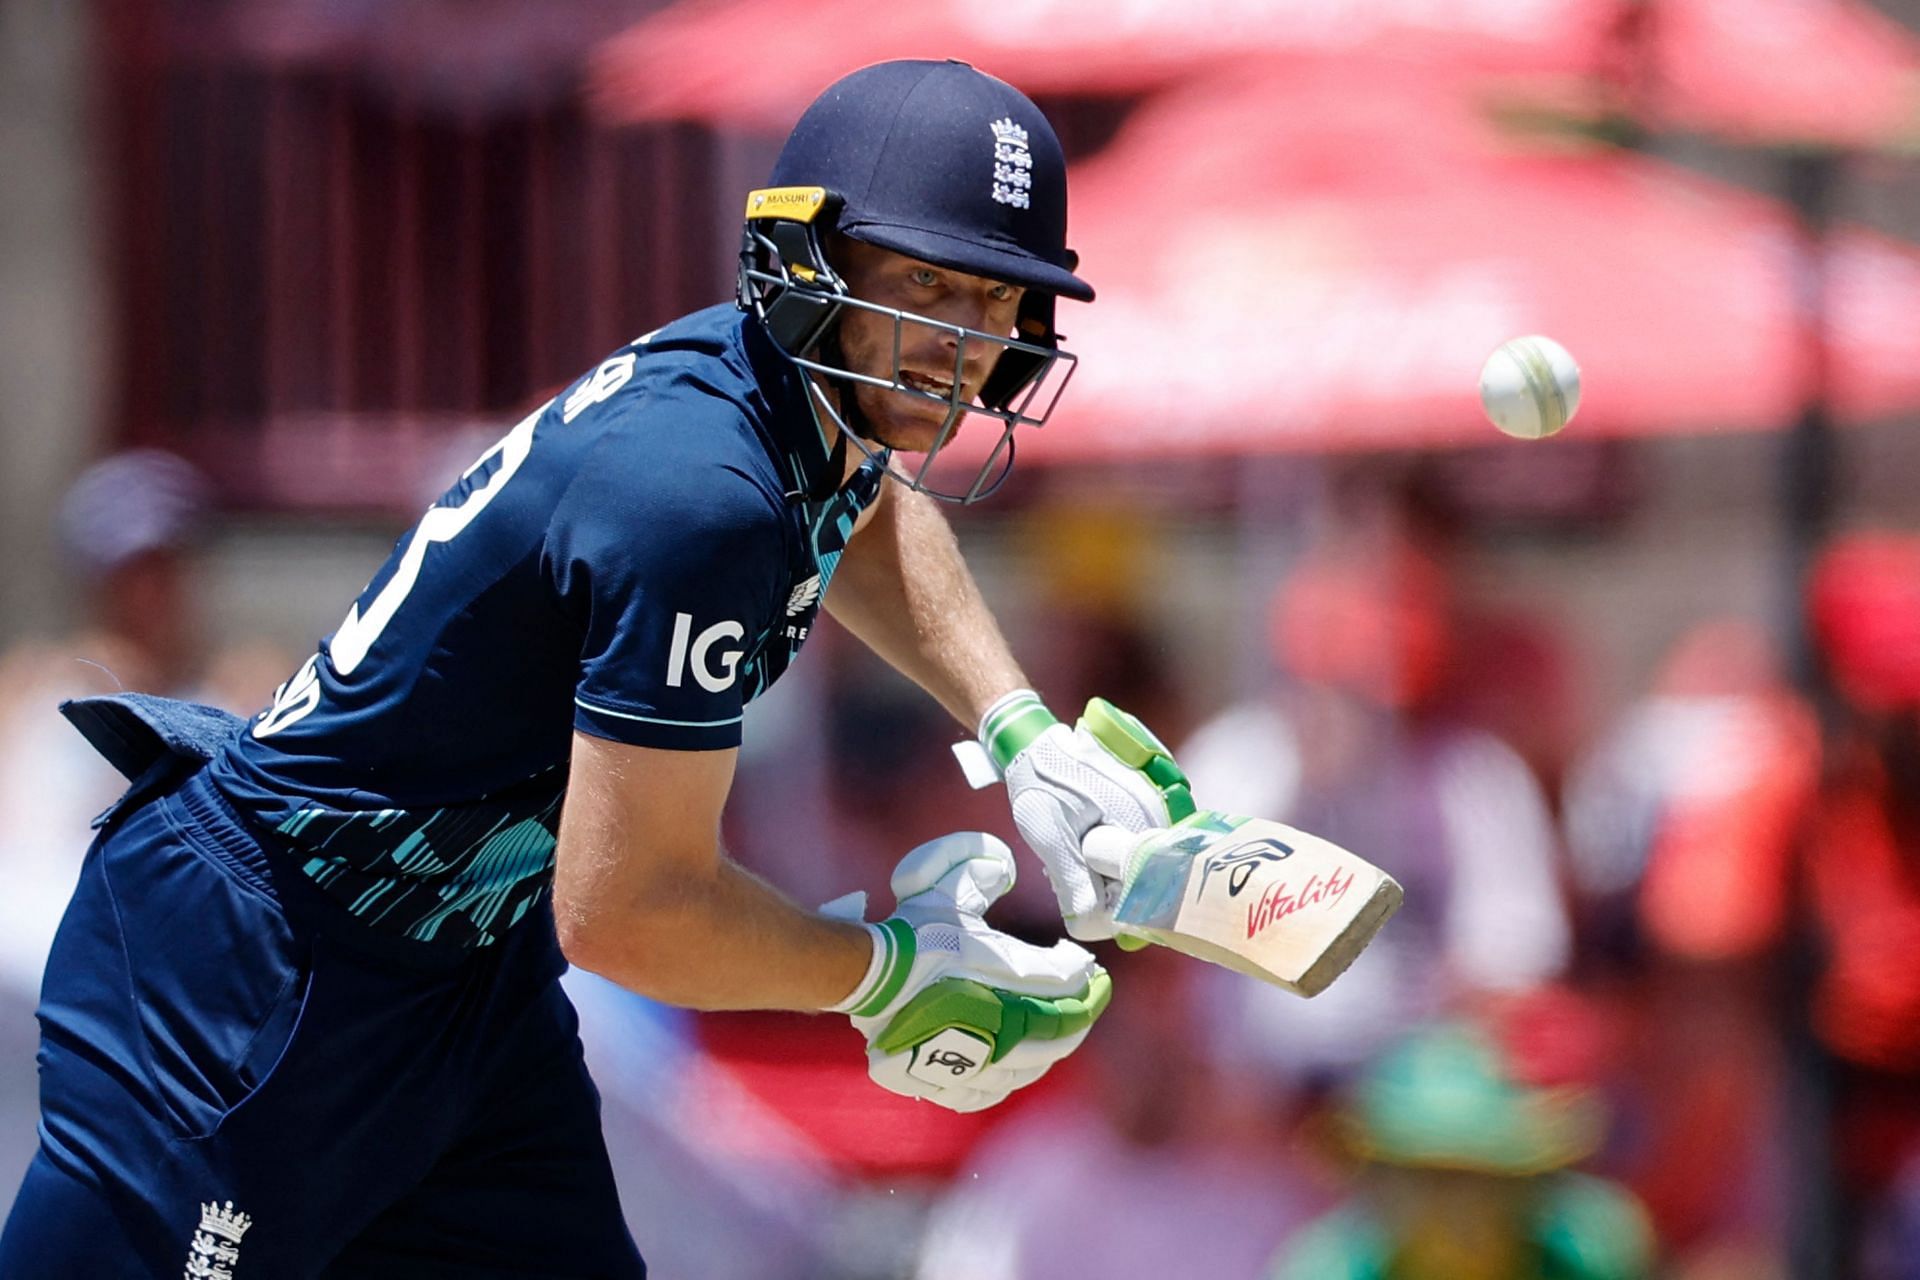 Jos Buttler stayed unbeaten at 94 off 82 deliveries. (Credits: Twitter)